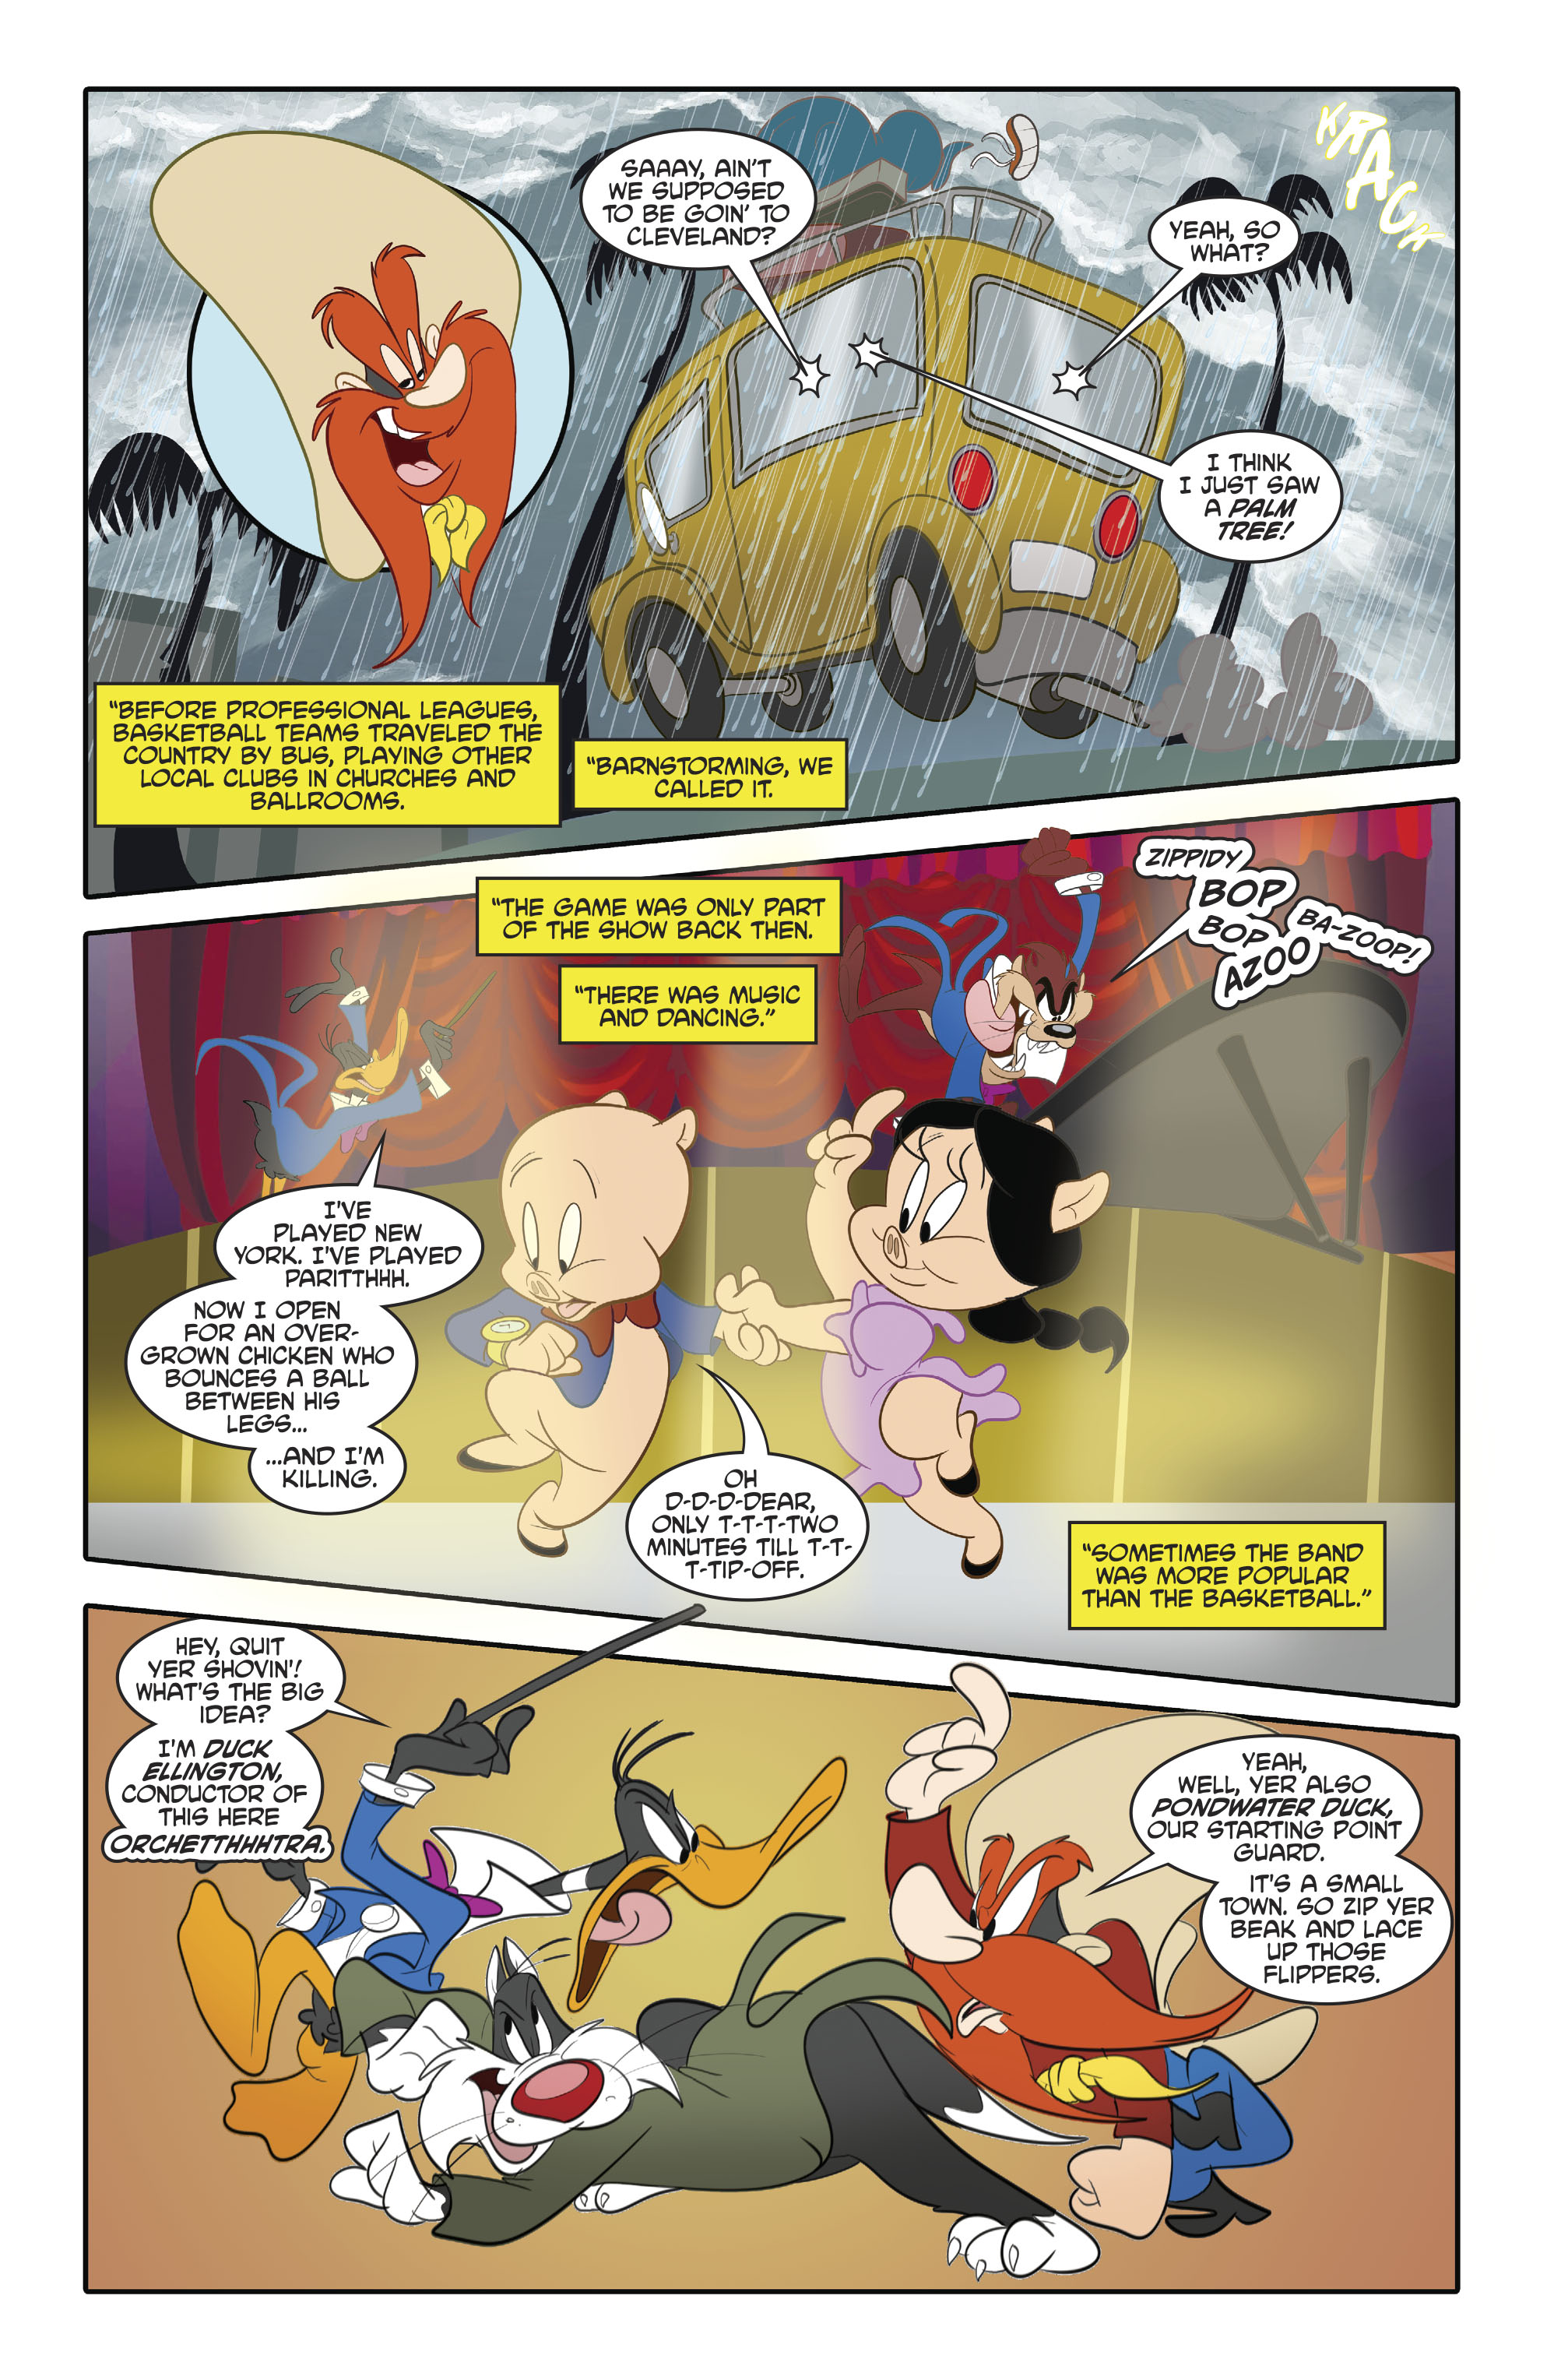 Looney Tunes (1994-): Chapter 252 - Page 3